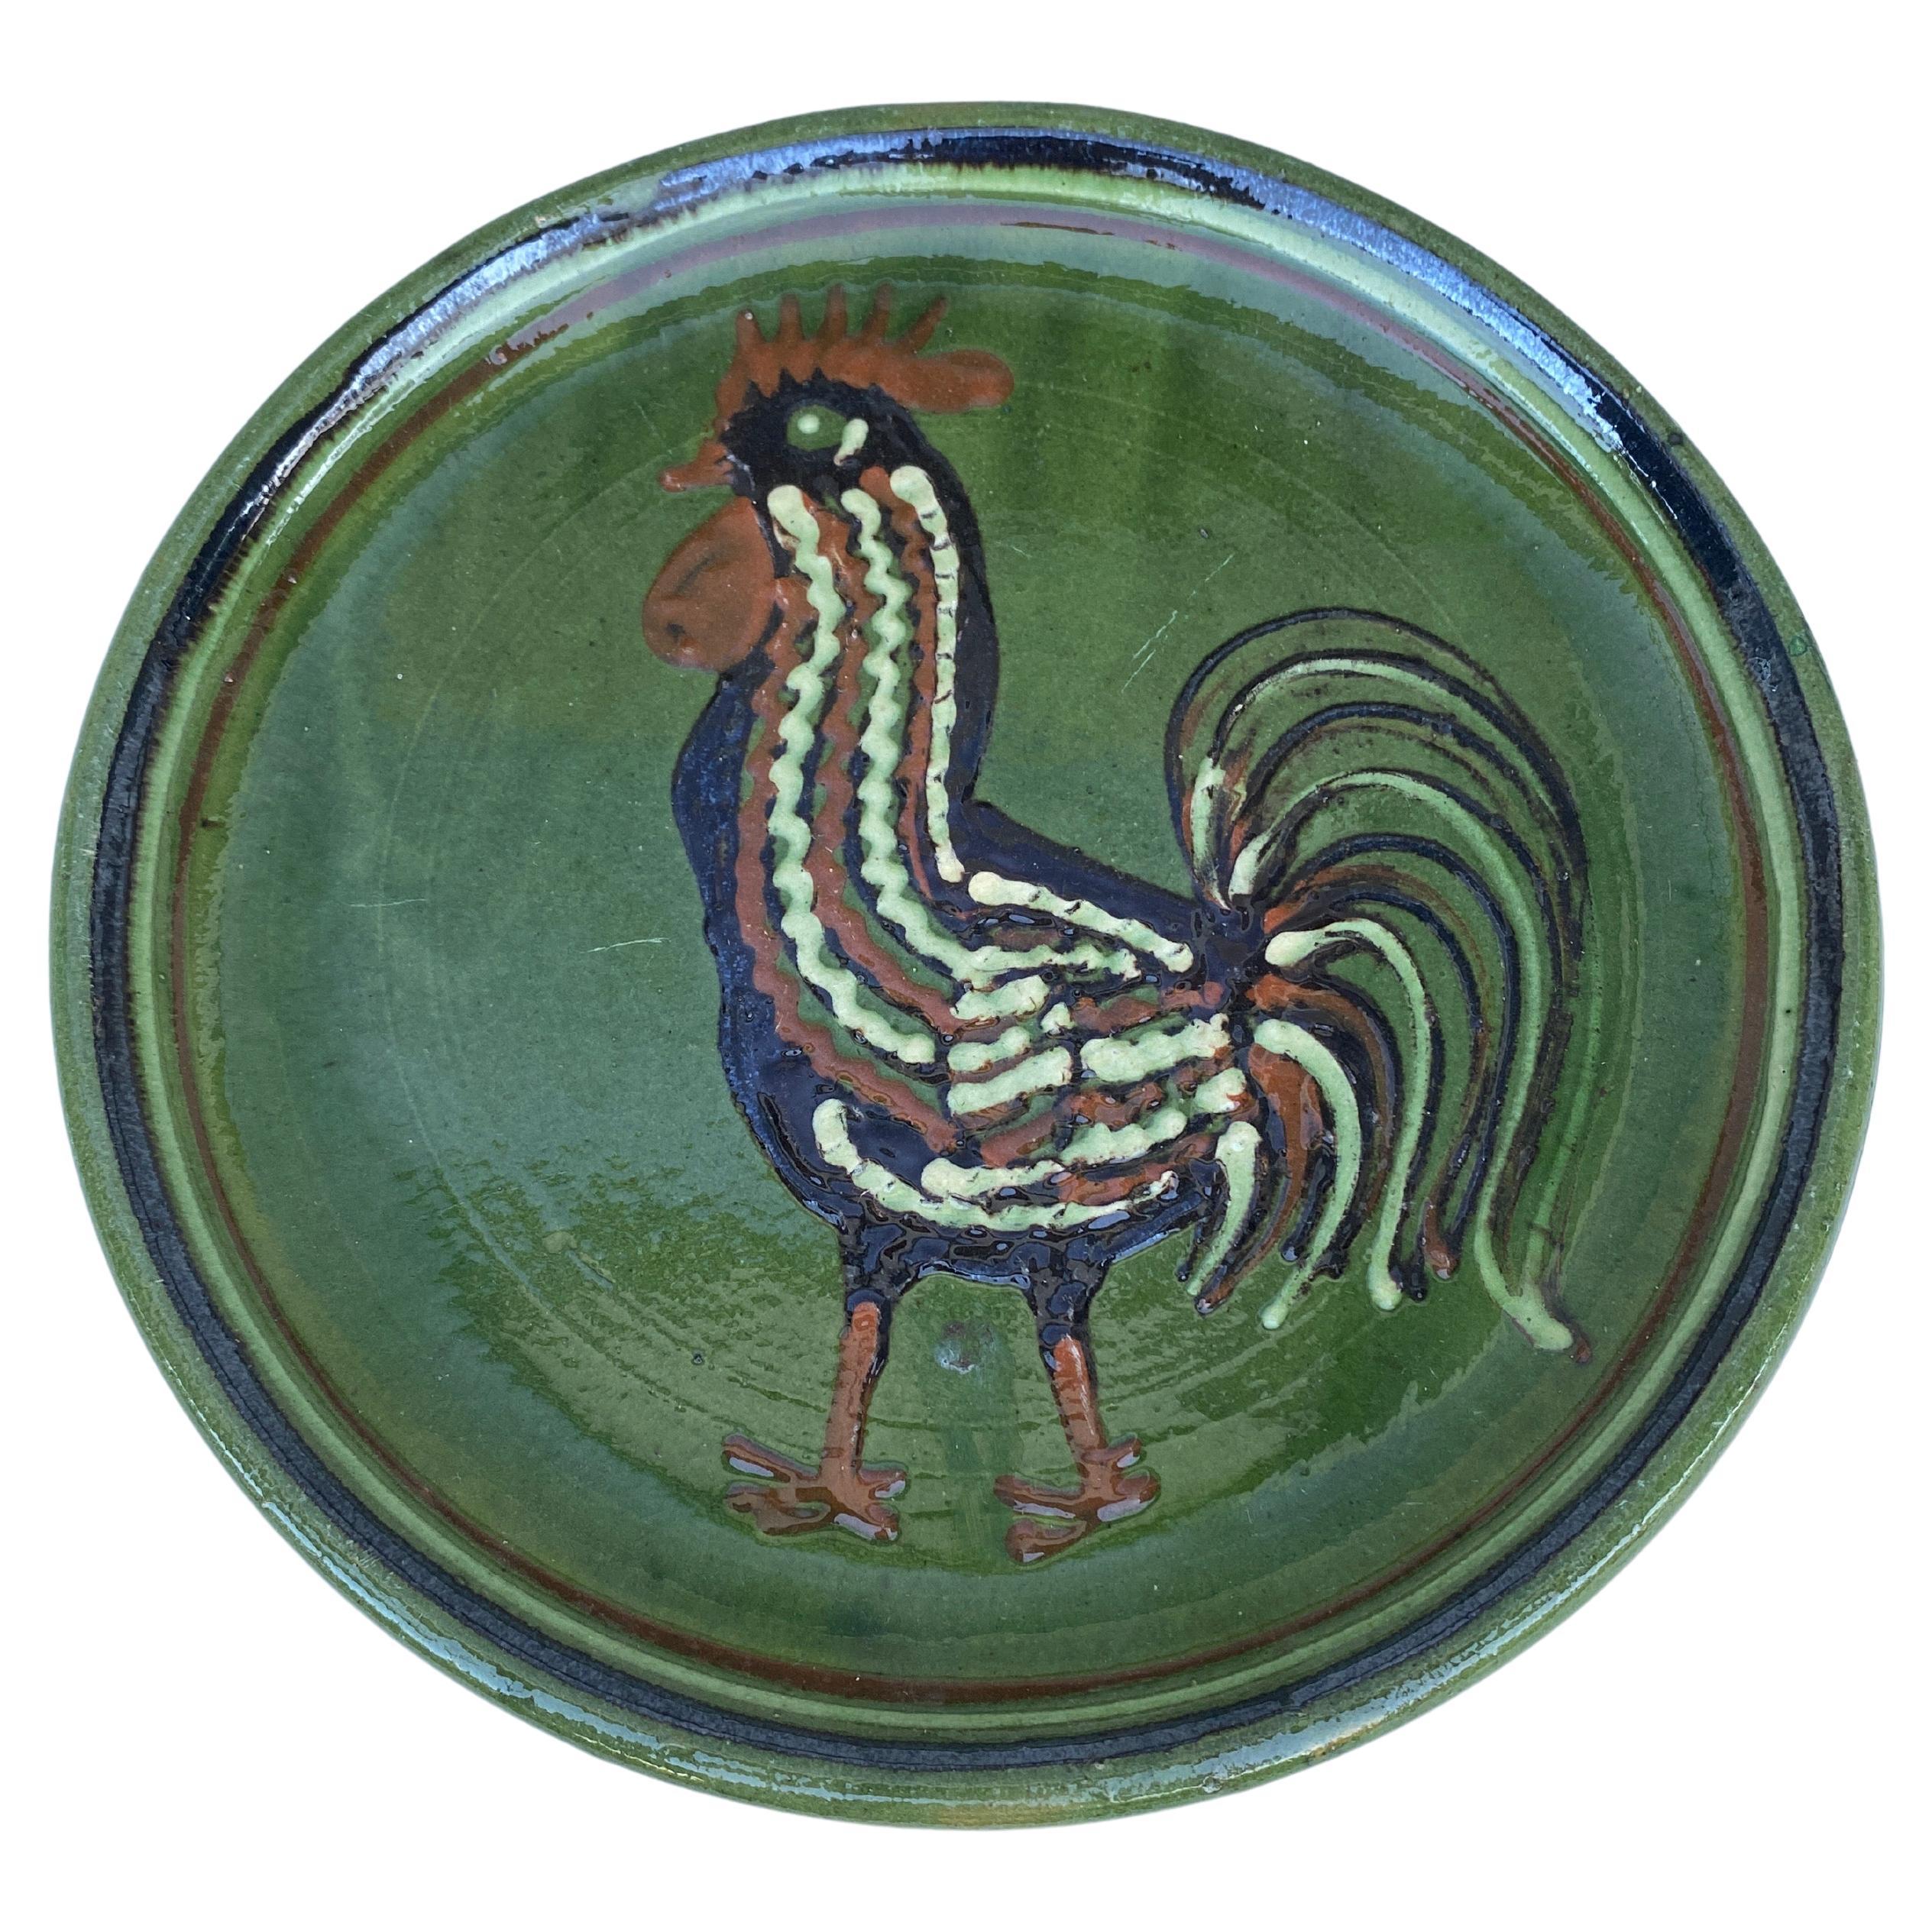 19th Century Large French Pottery Savoie Rooster Platter.
Country style.